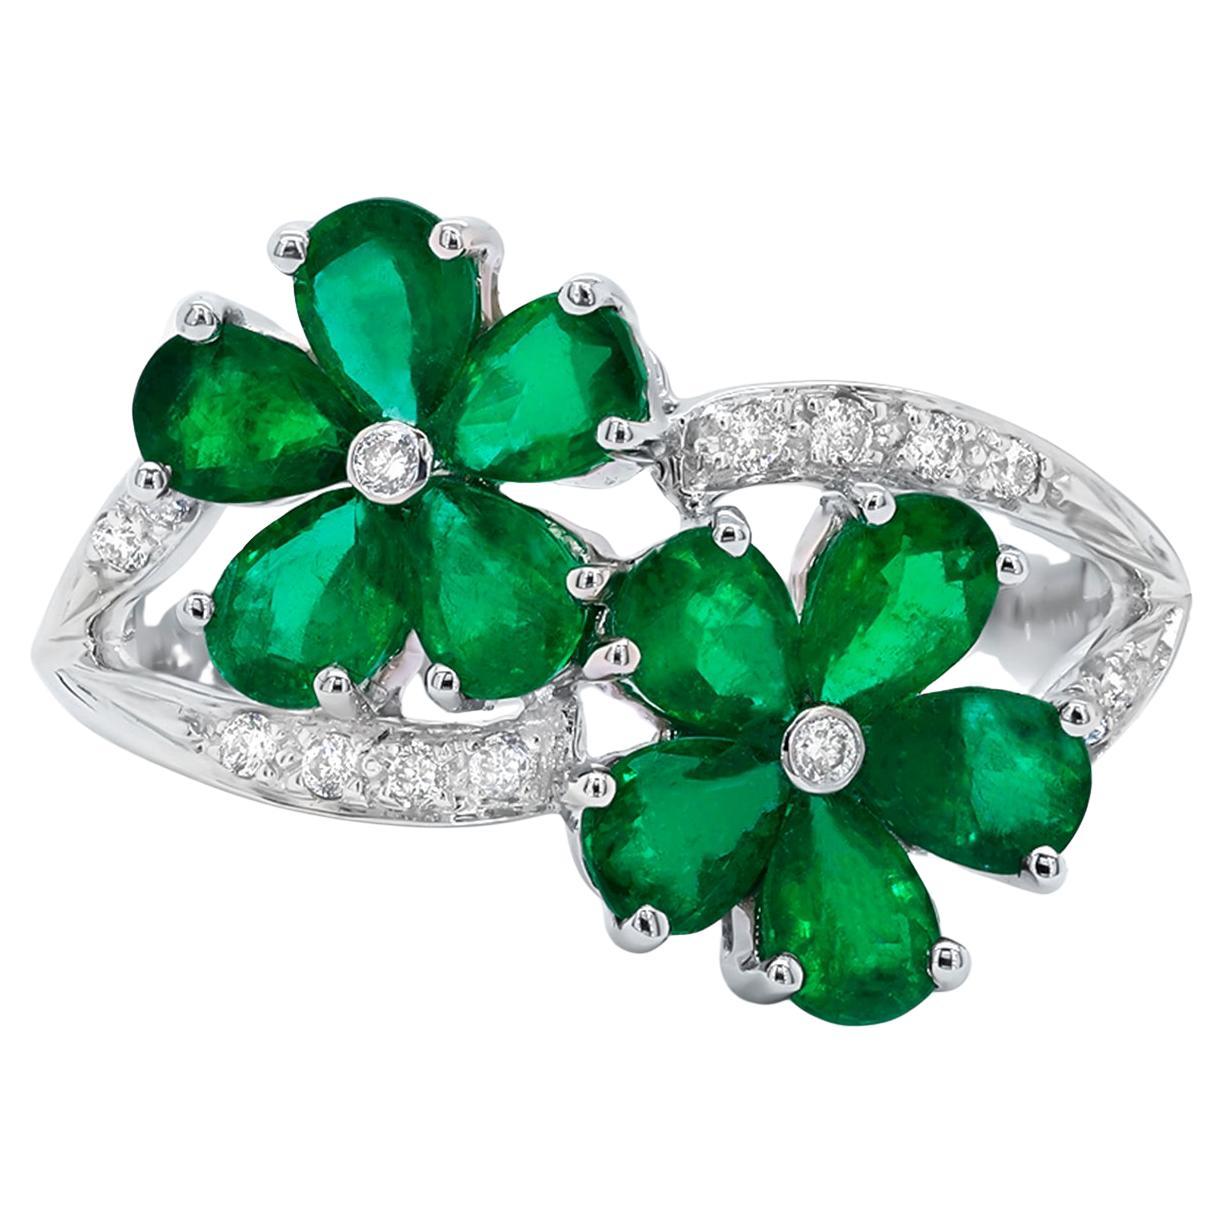 Emerald Flower Ring Diamond Setting 1.42 Carats 18K White Gold For Sale